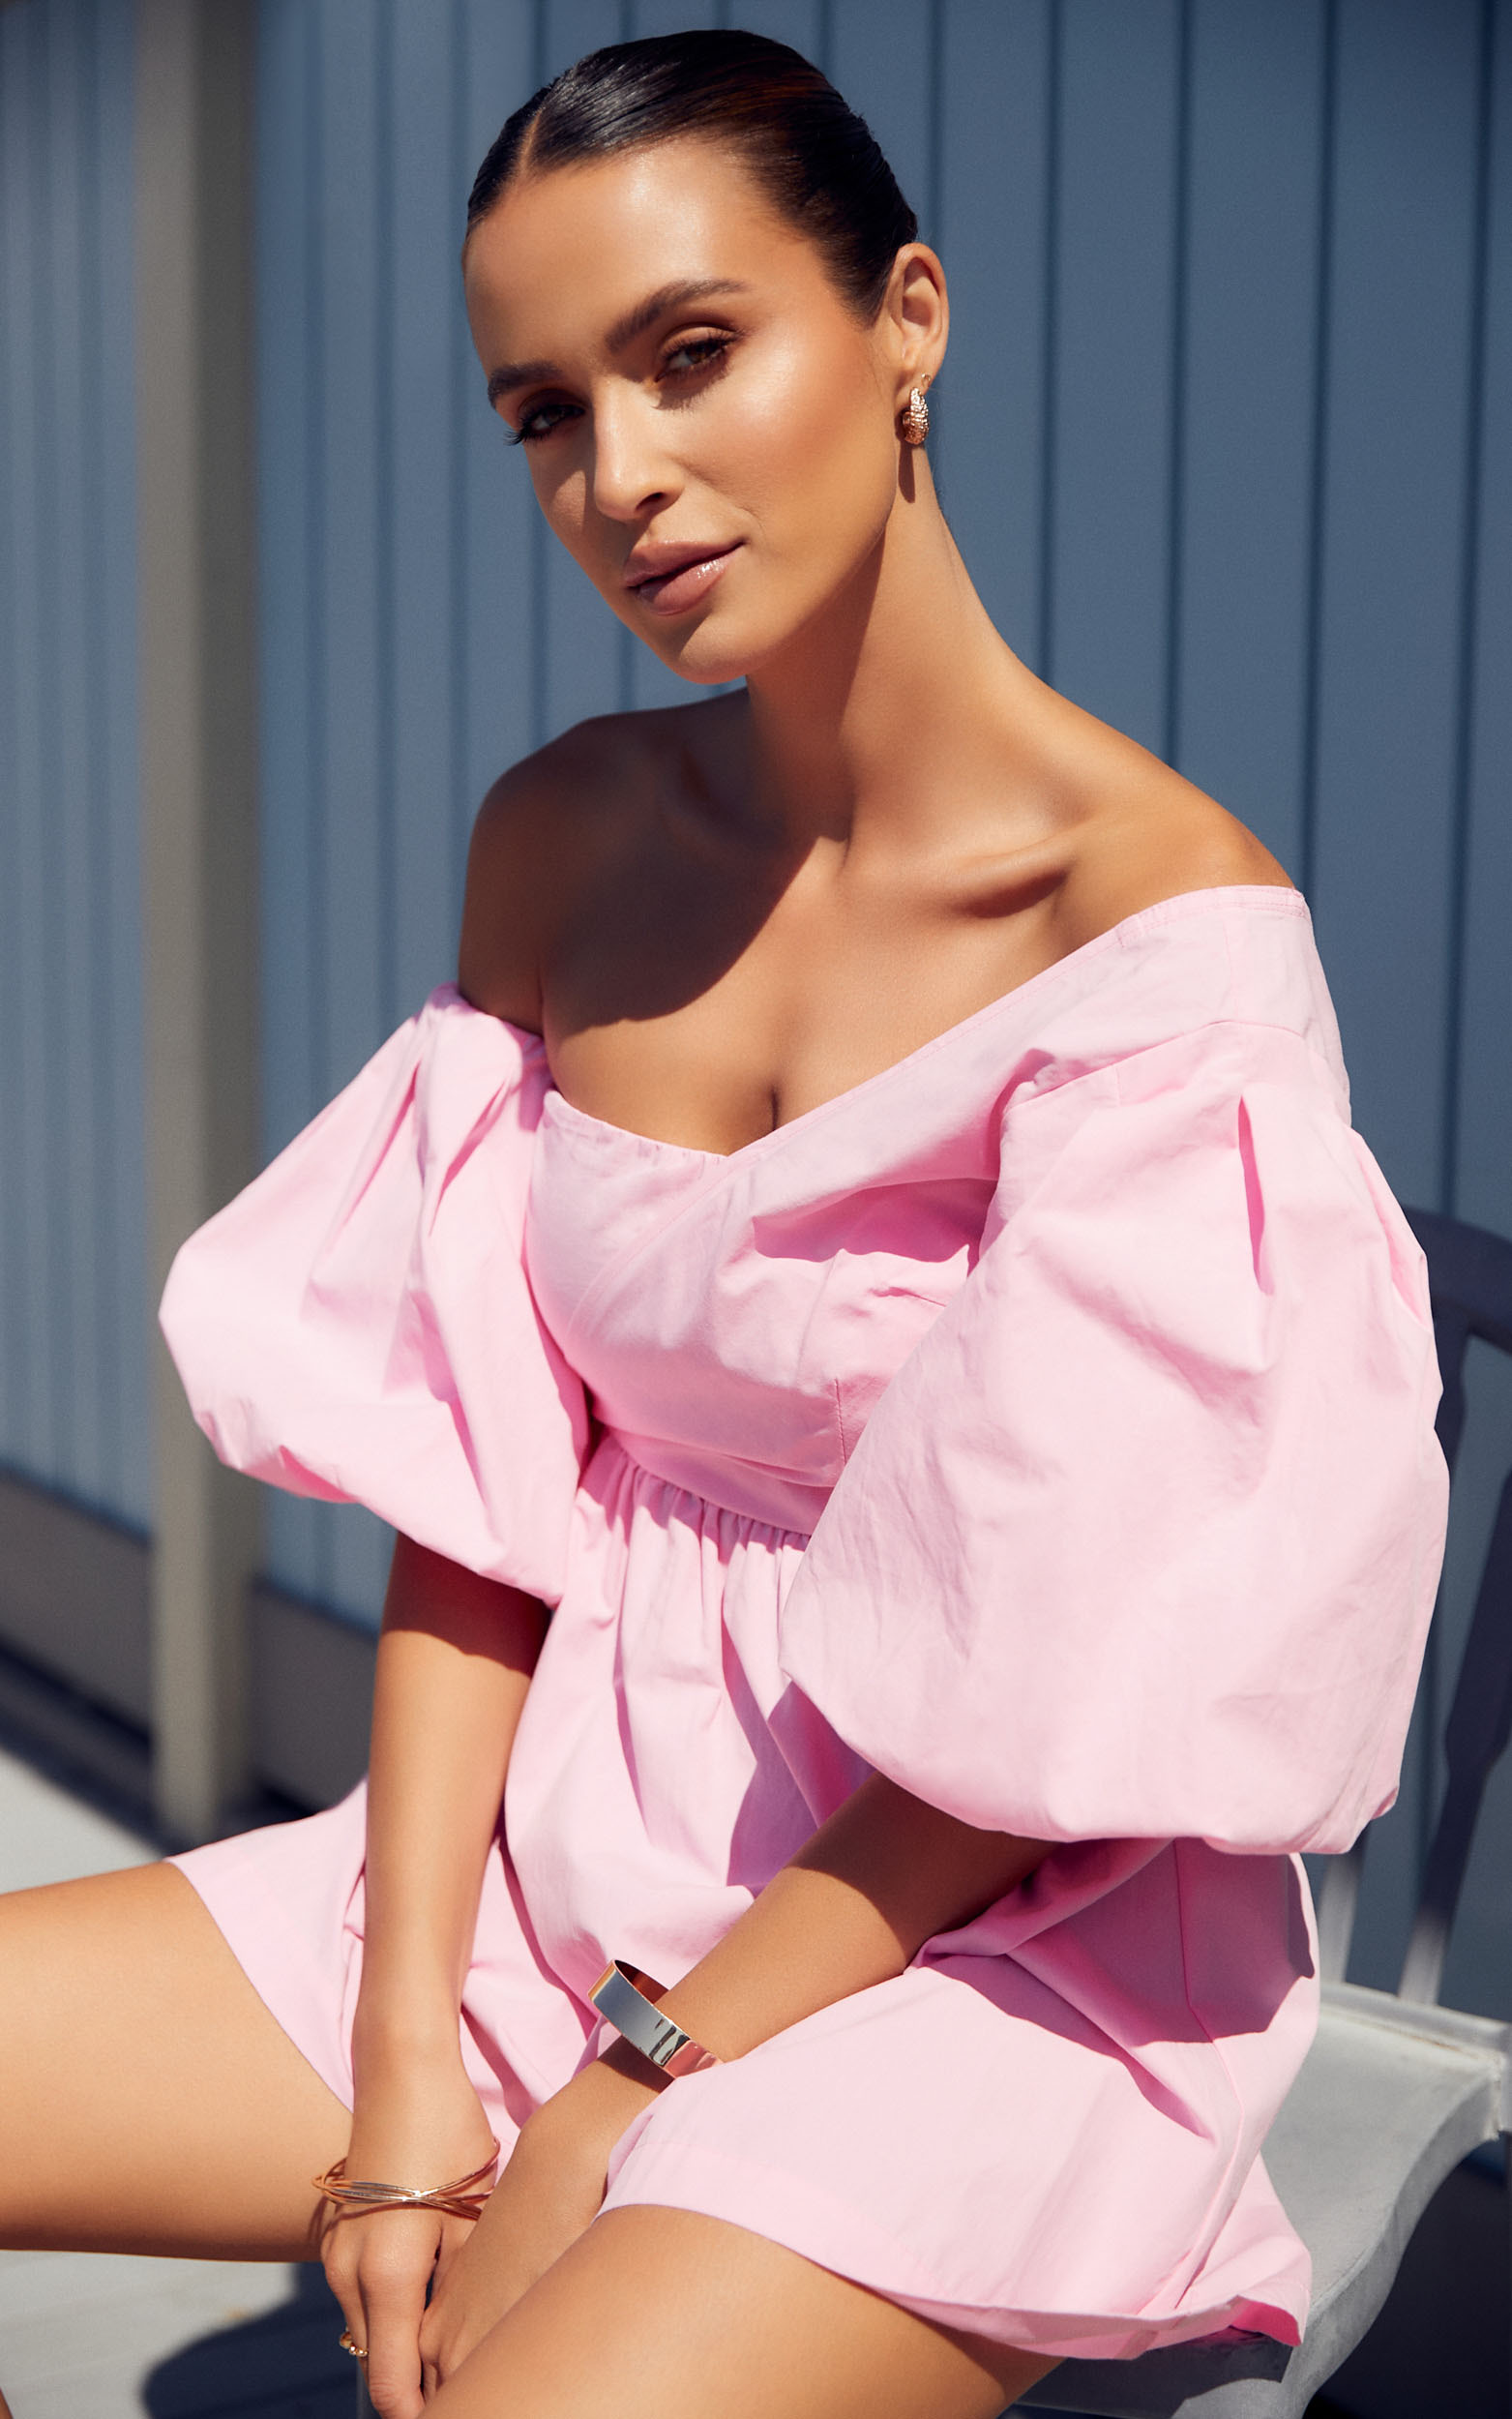 Sula Mini Dress - Asymmetric Off One Shoulder Puff Sleeve Dress in Pink - 06, PNK1, hi-res image number null